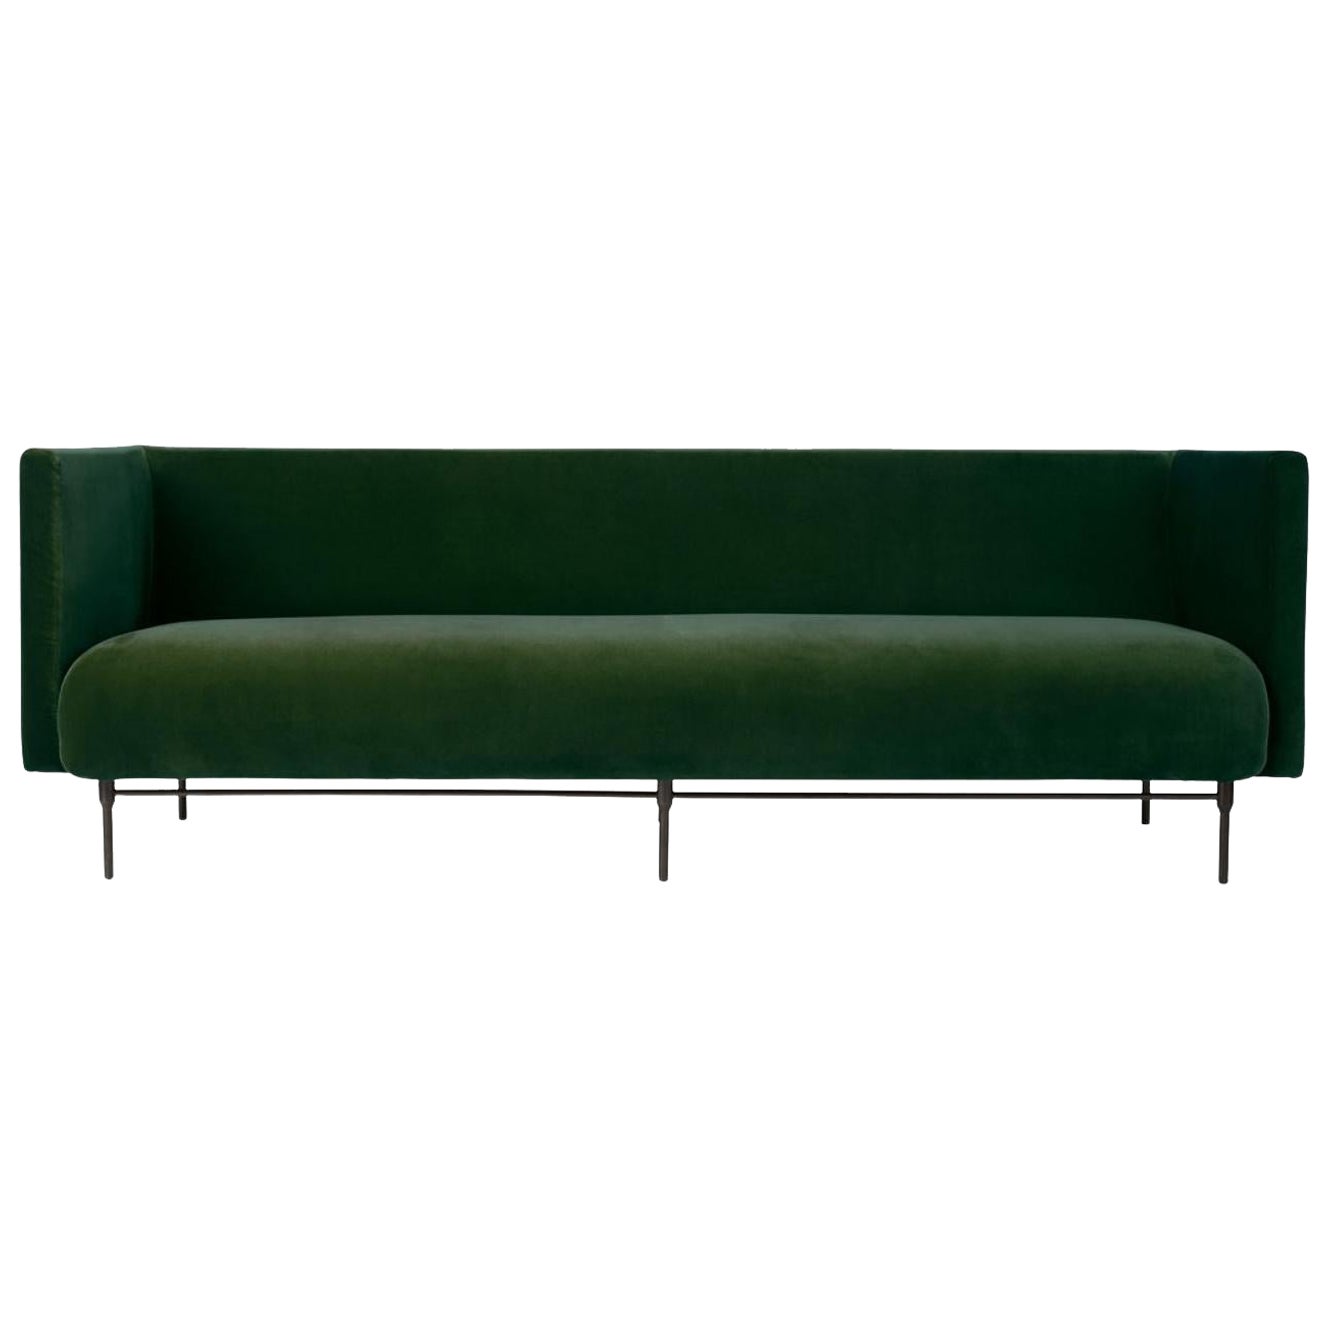 Galore 3 Seater Forest Green by Warm Nordic